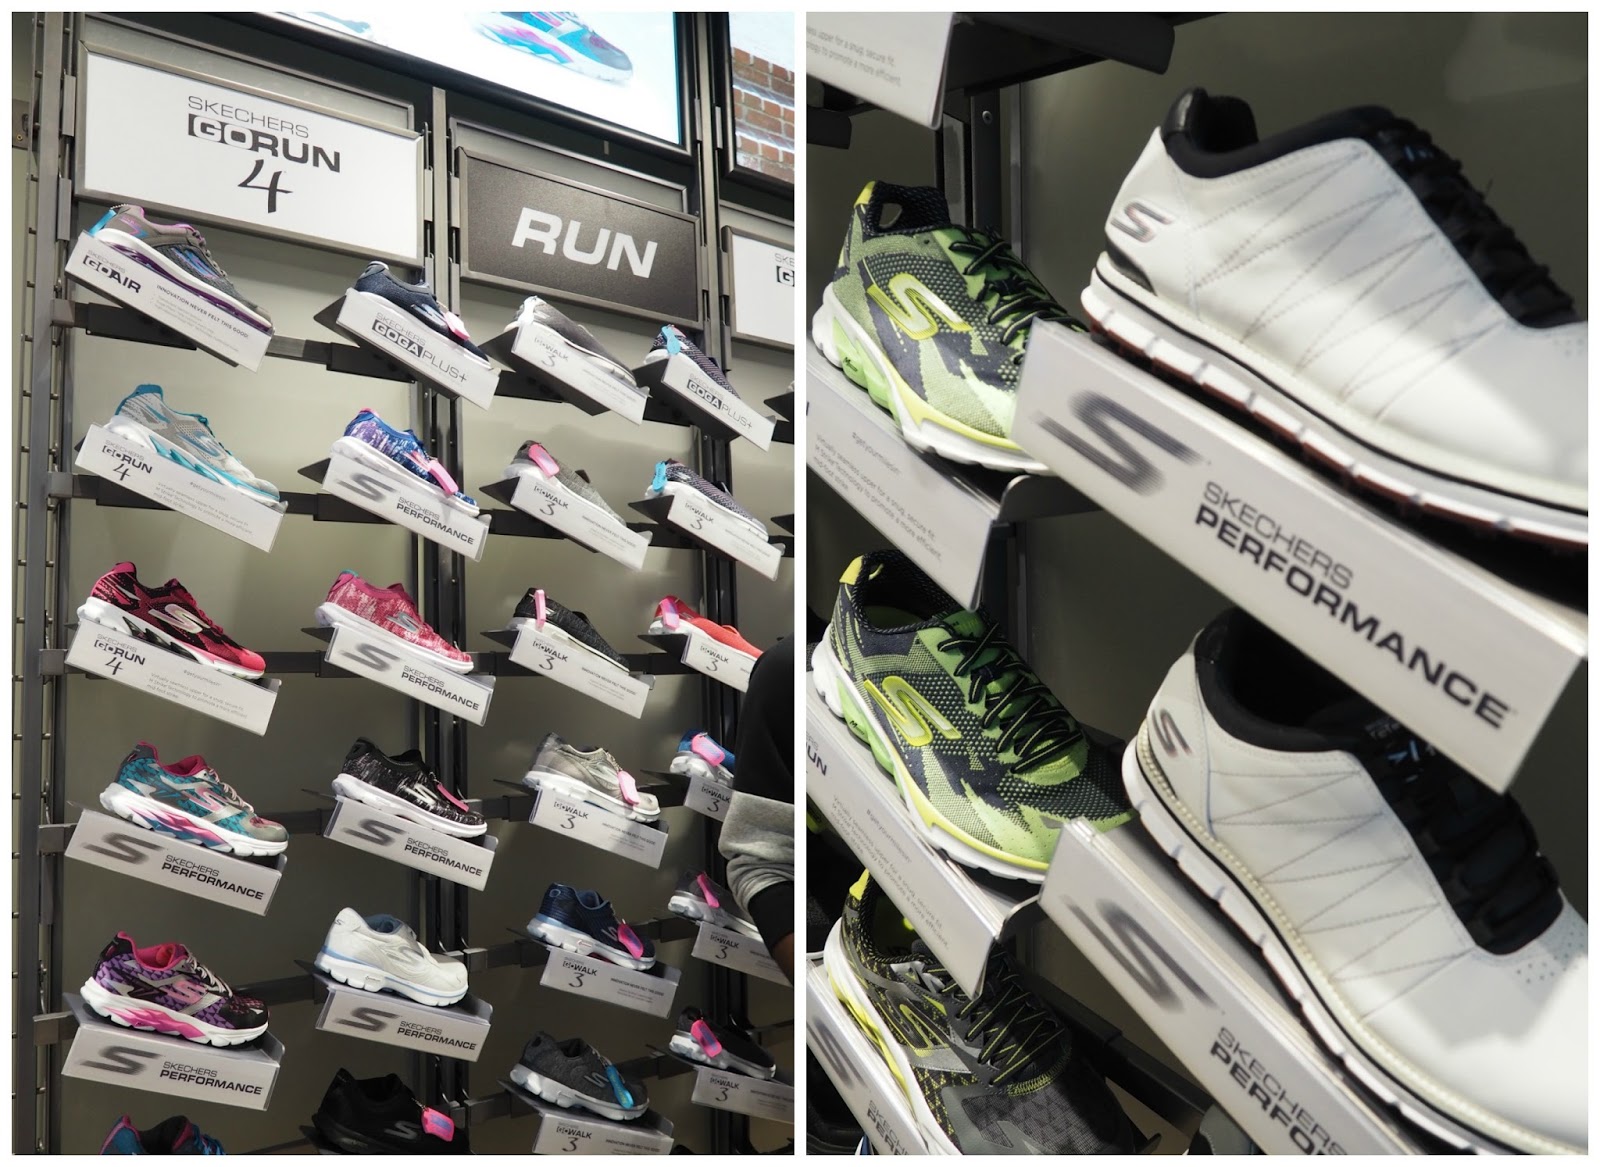 skechers shop leicester